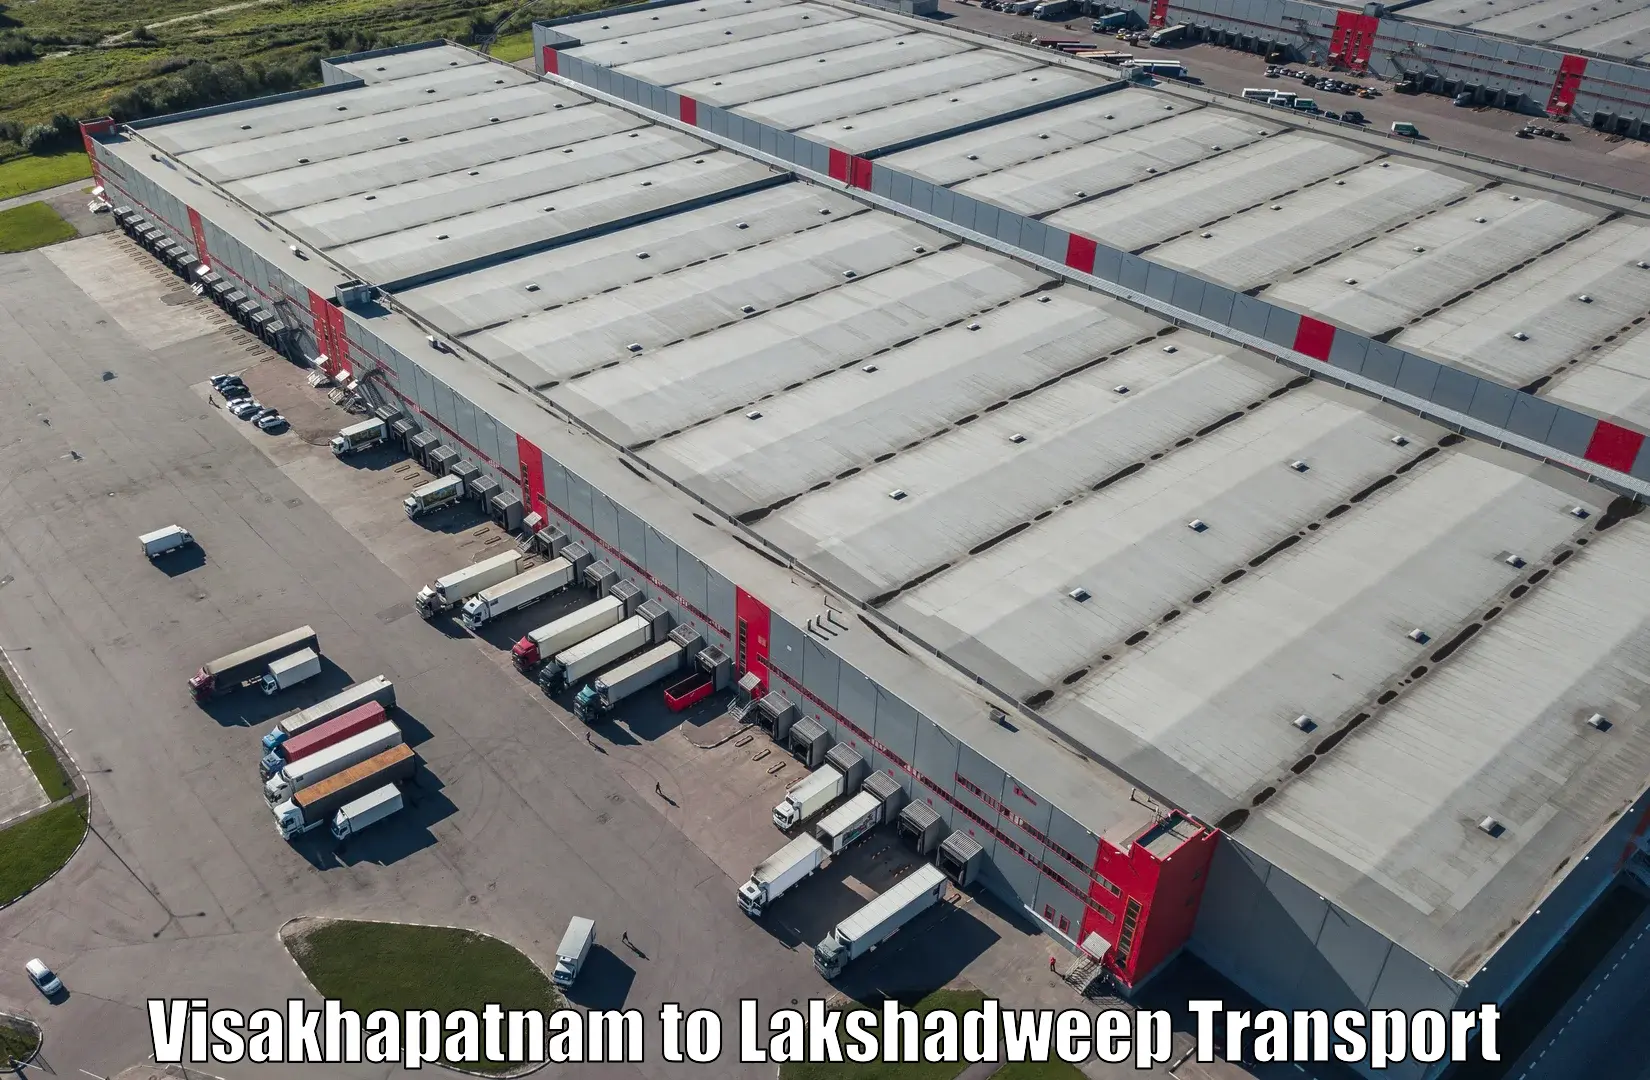 Truck transport companies in India Visakhapatnam to Lakshadweep